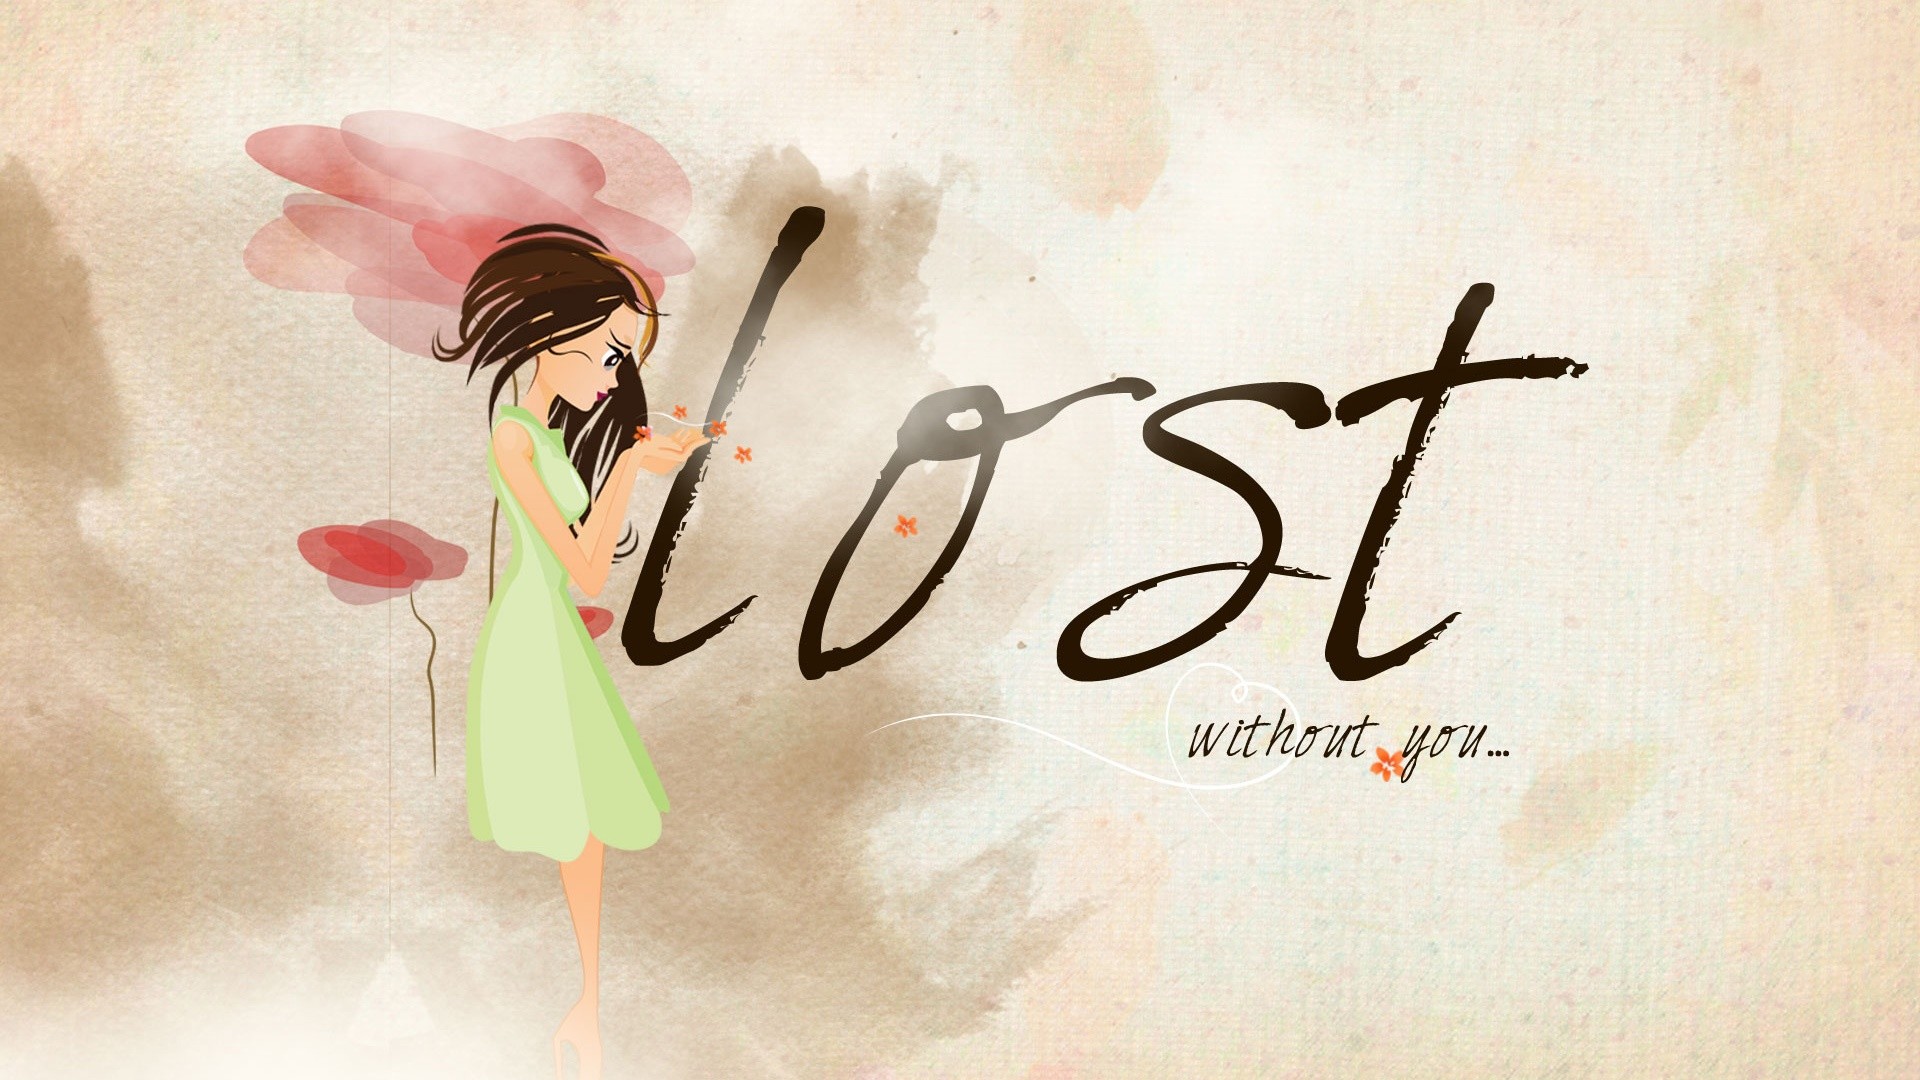 1920x1080 lost without you